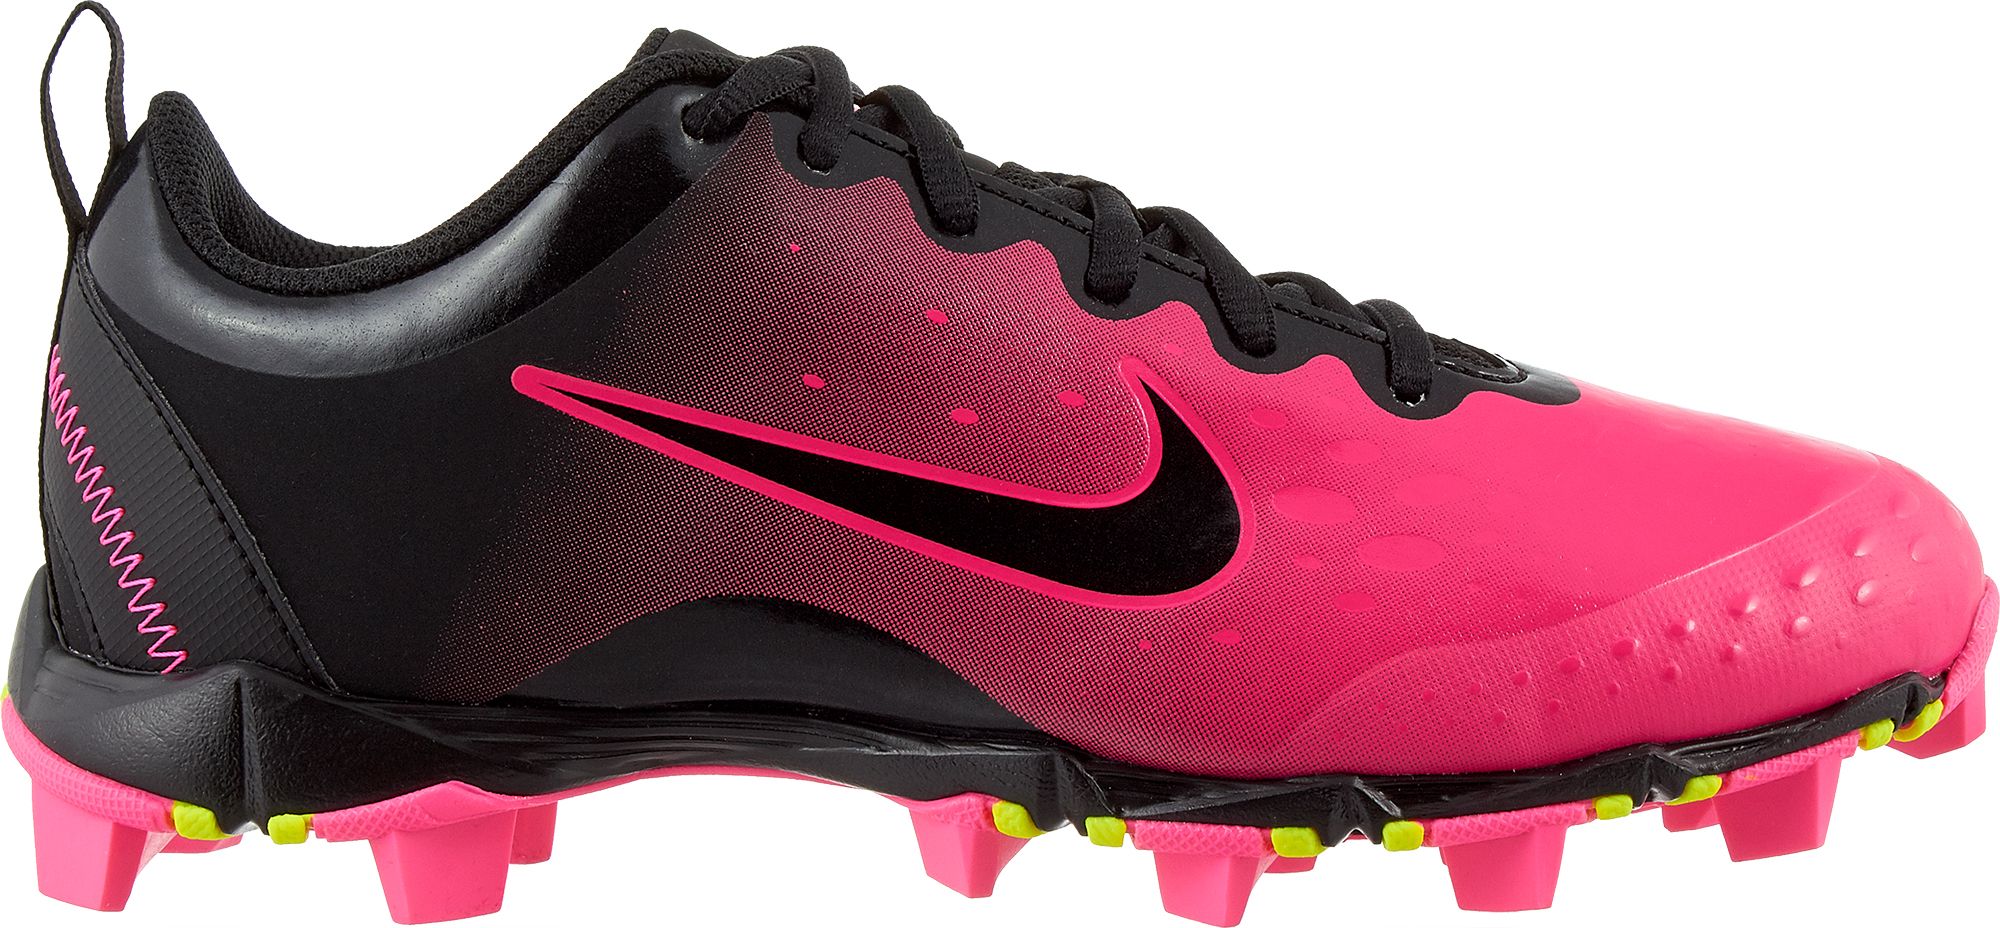 pink cleats